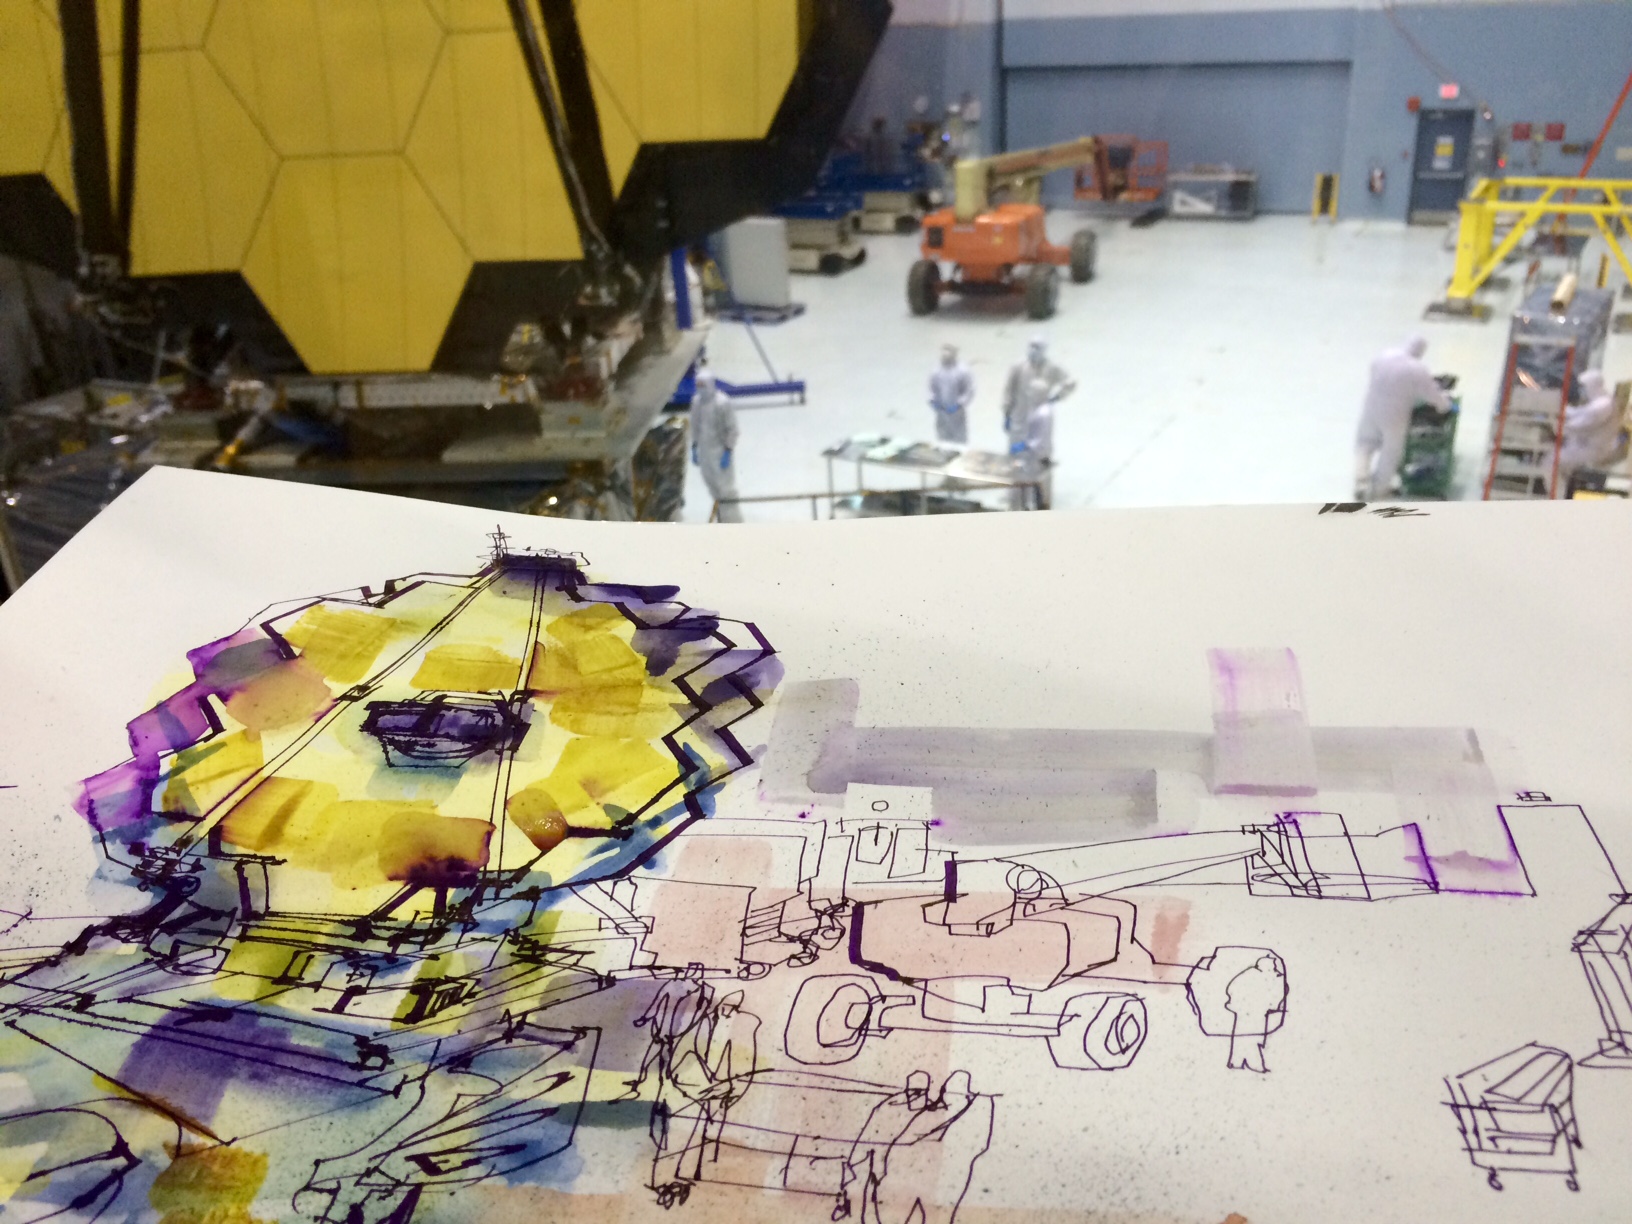 Jedidiah Dore’s ink and watercolor sketch photographed in front of the James Webb Space Telescope.